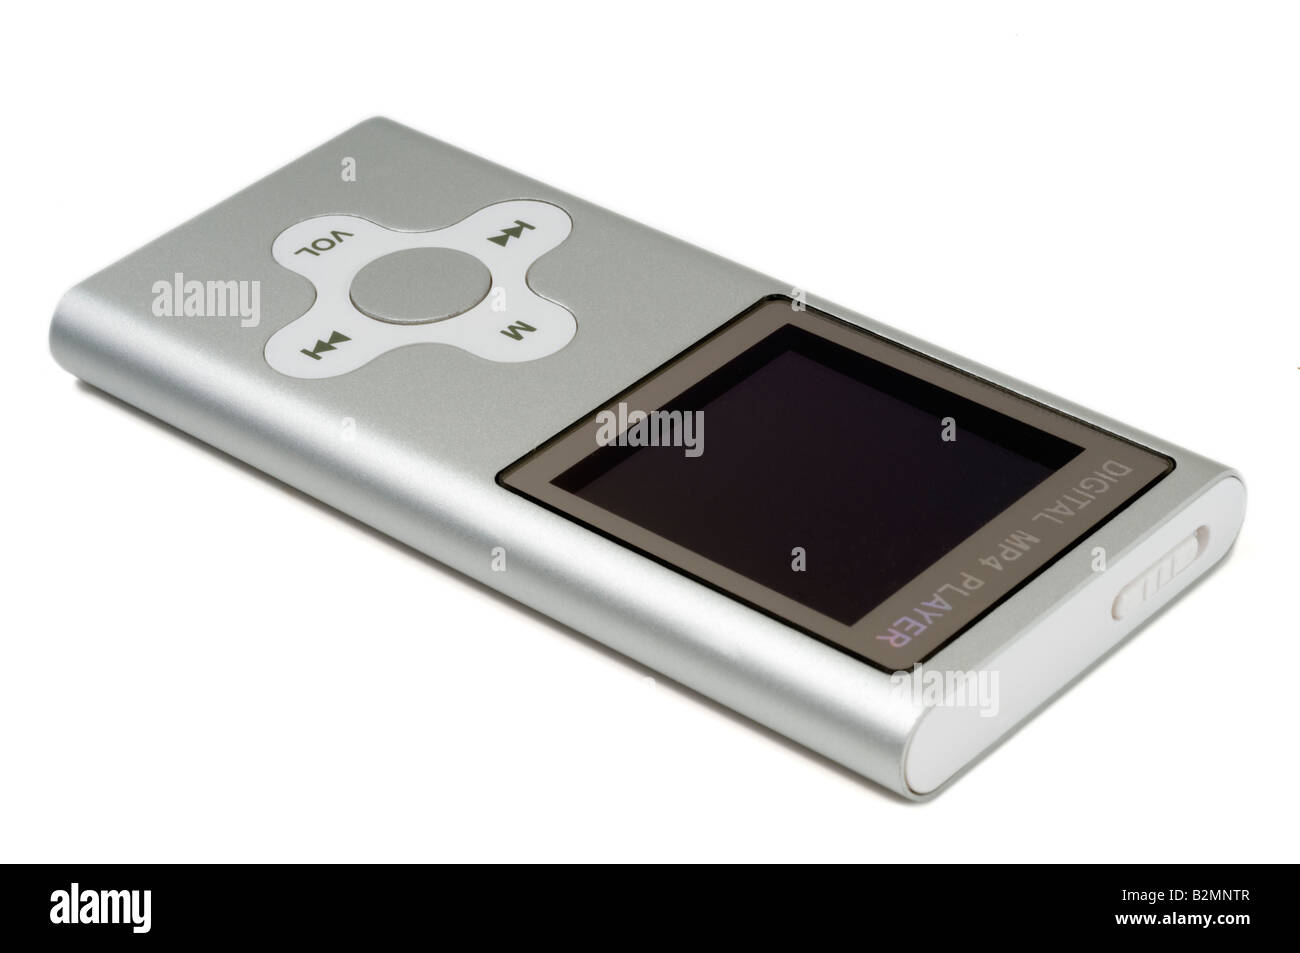 A personal mp4 player Stock Photo